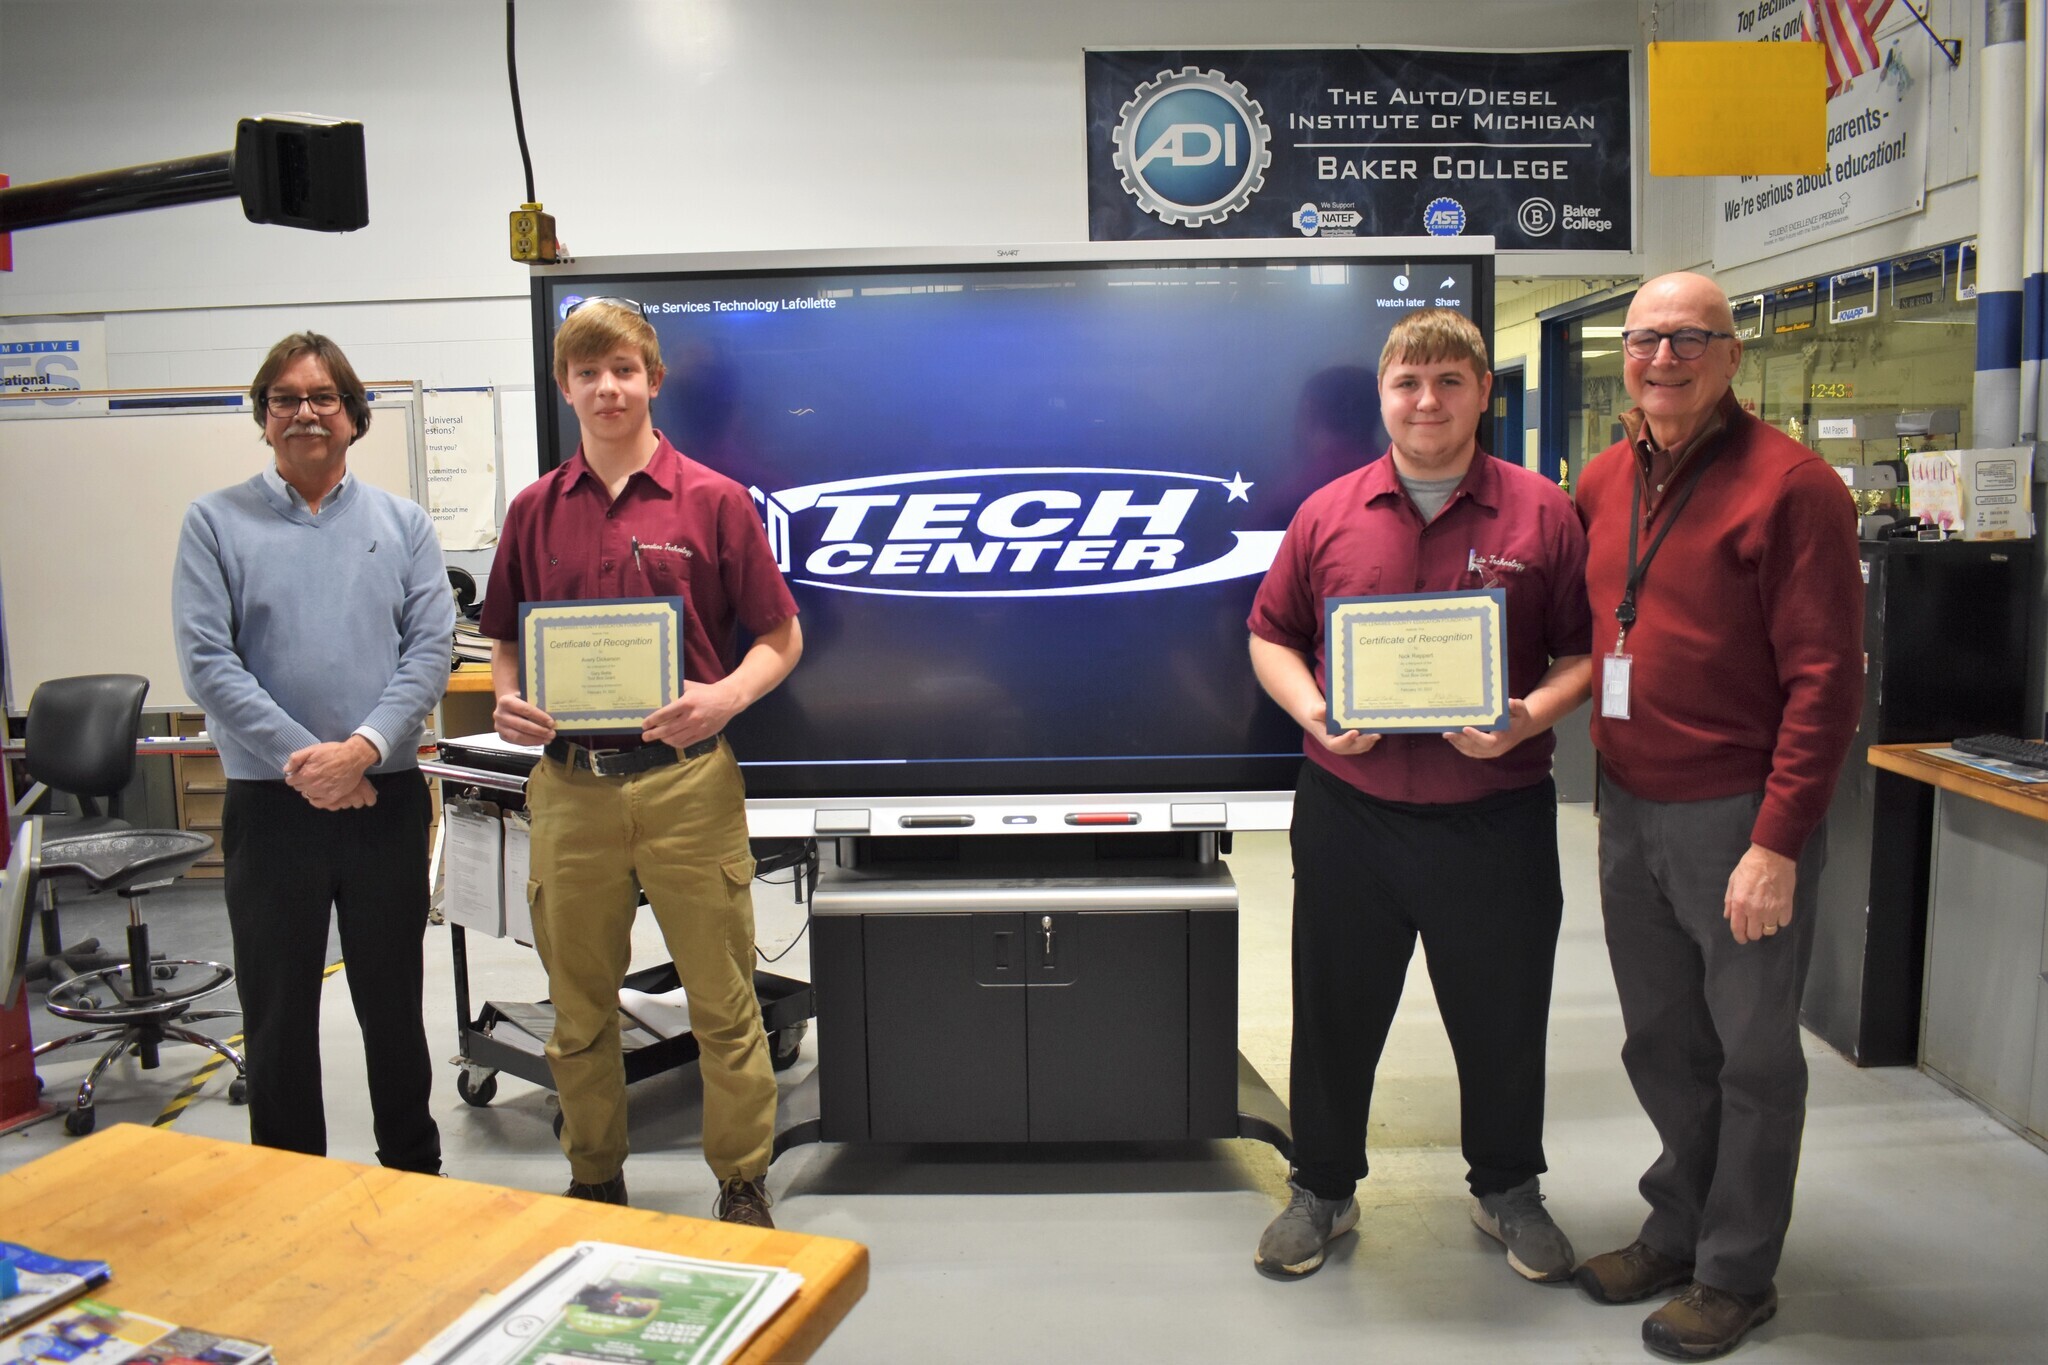 Students Avery and Nick being presented tool grants